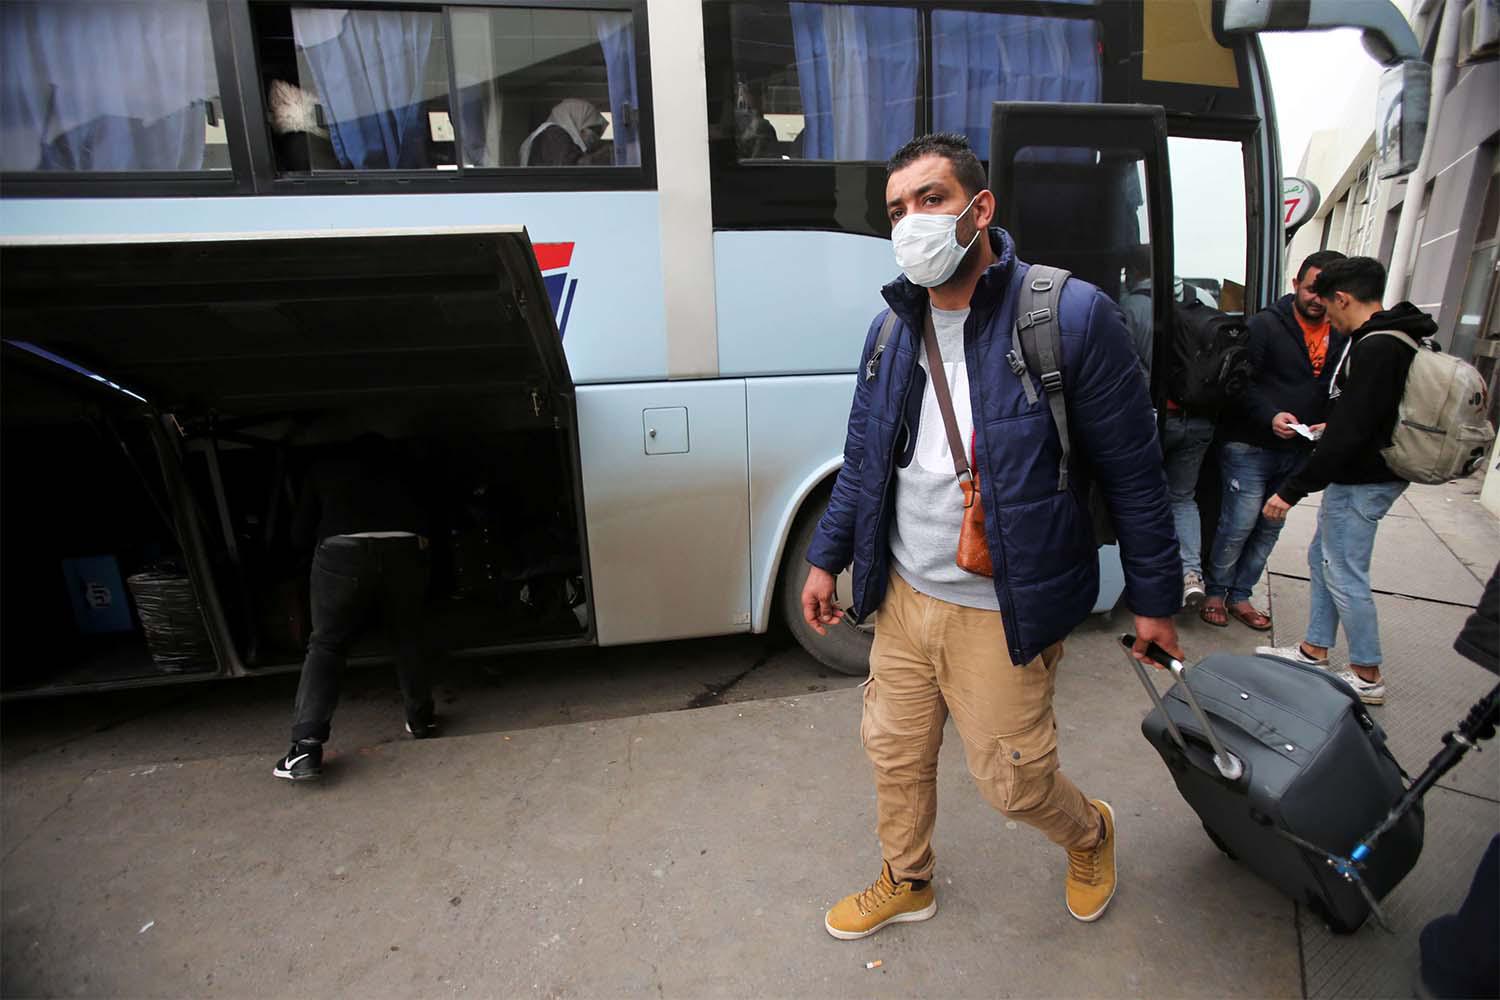 A man wearing a protective face mask walks with luggage, following the outbreak of coronavirus disease in Algiers